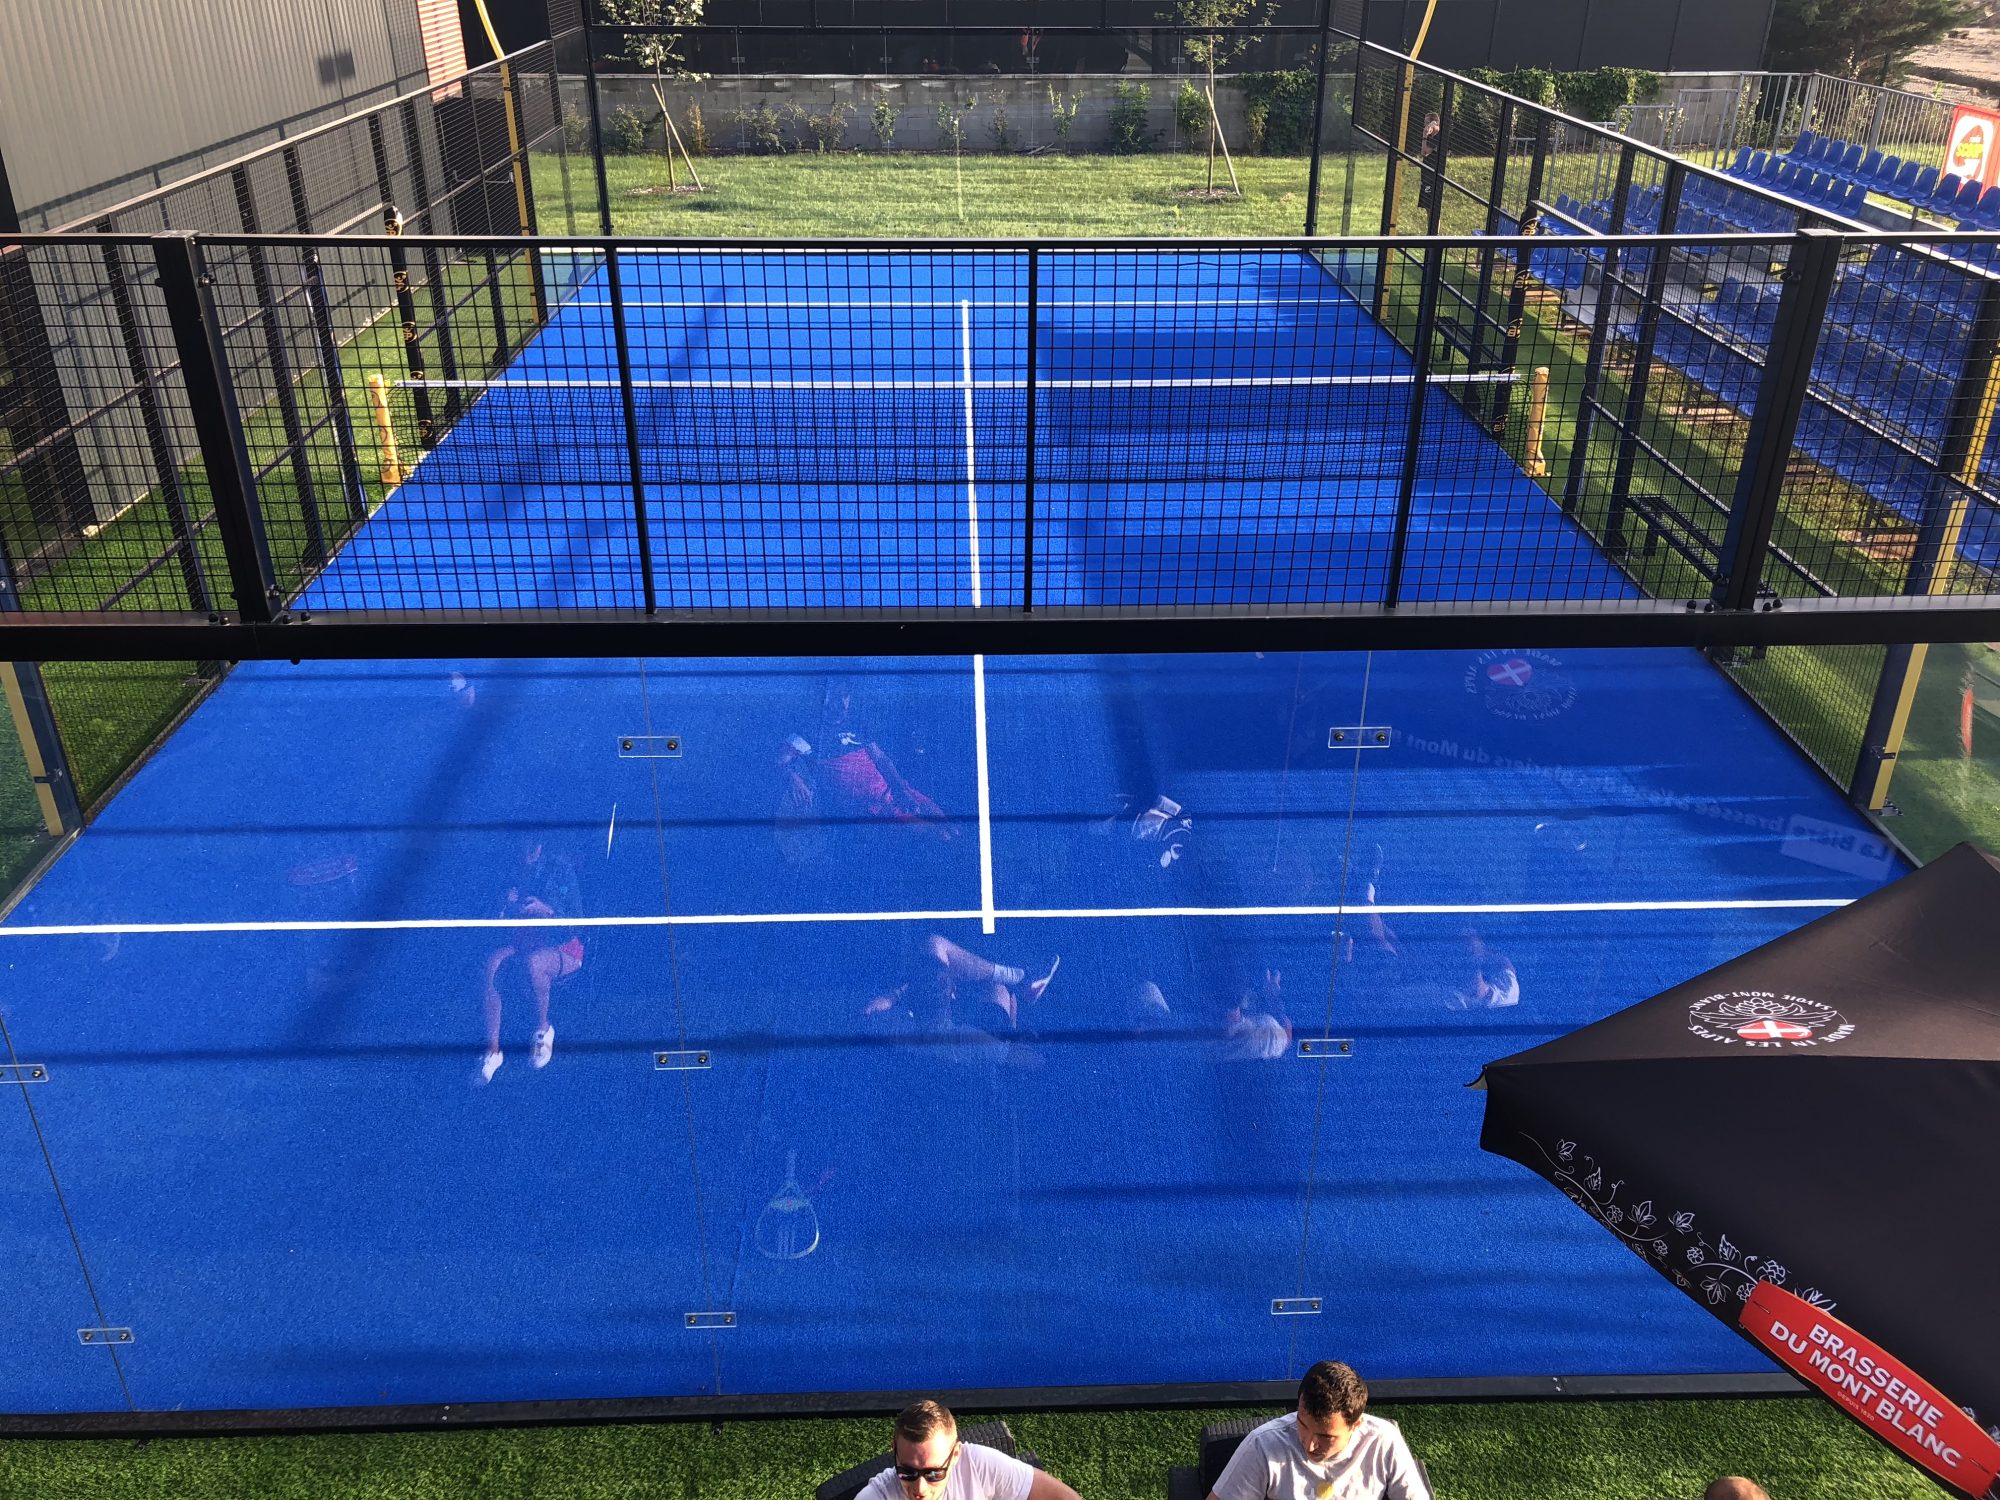 The grounds of padel glazed: since when?